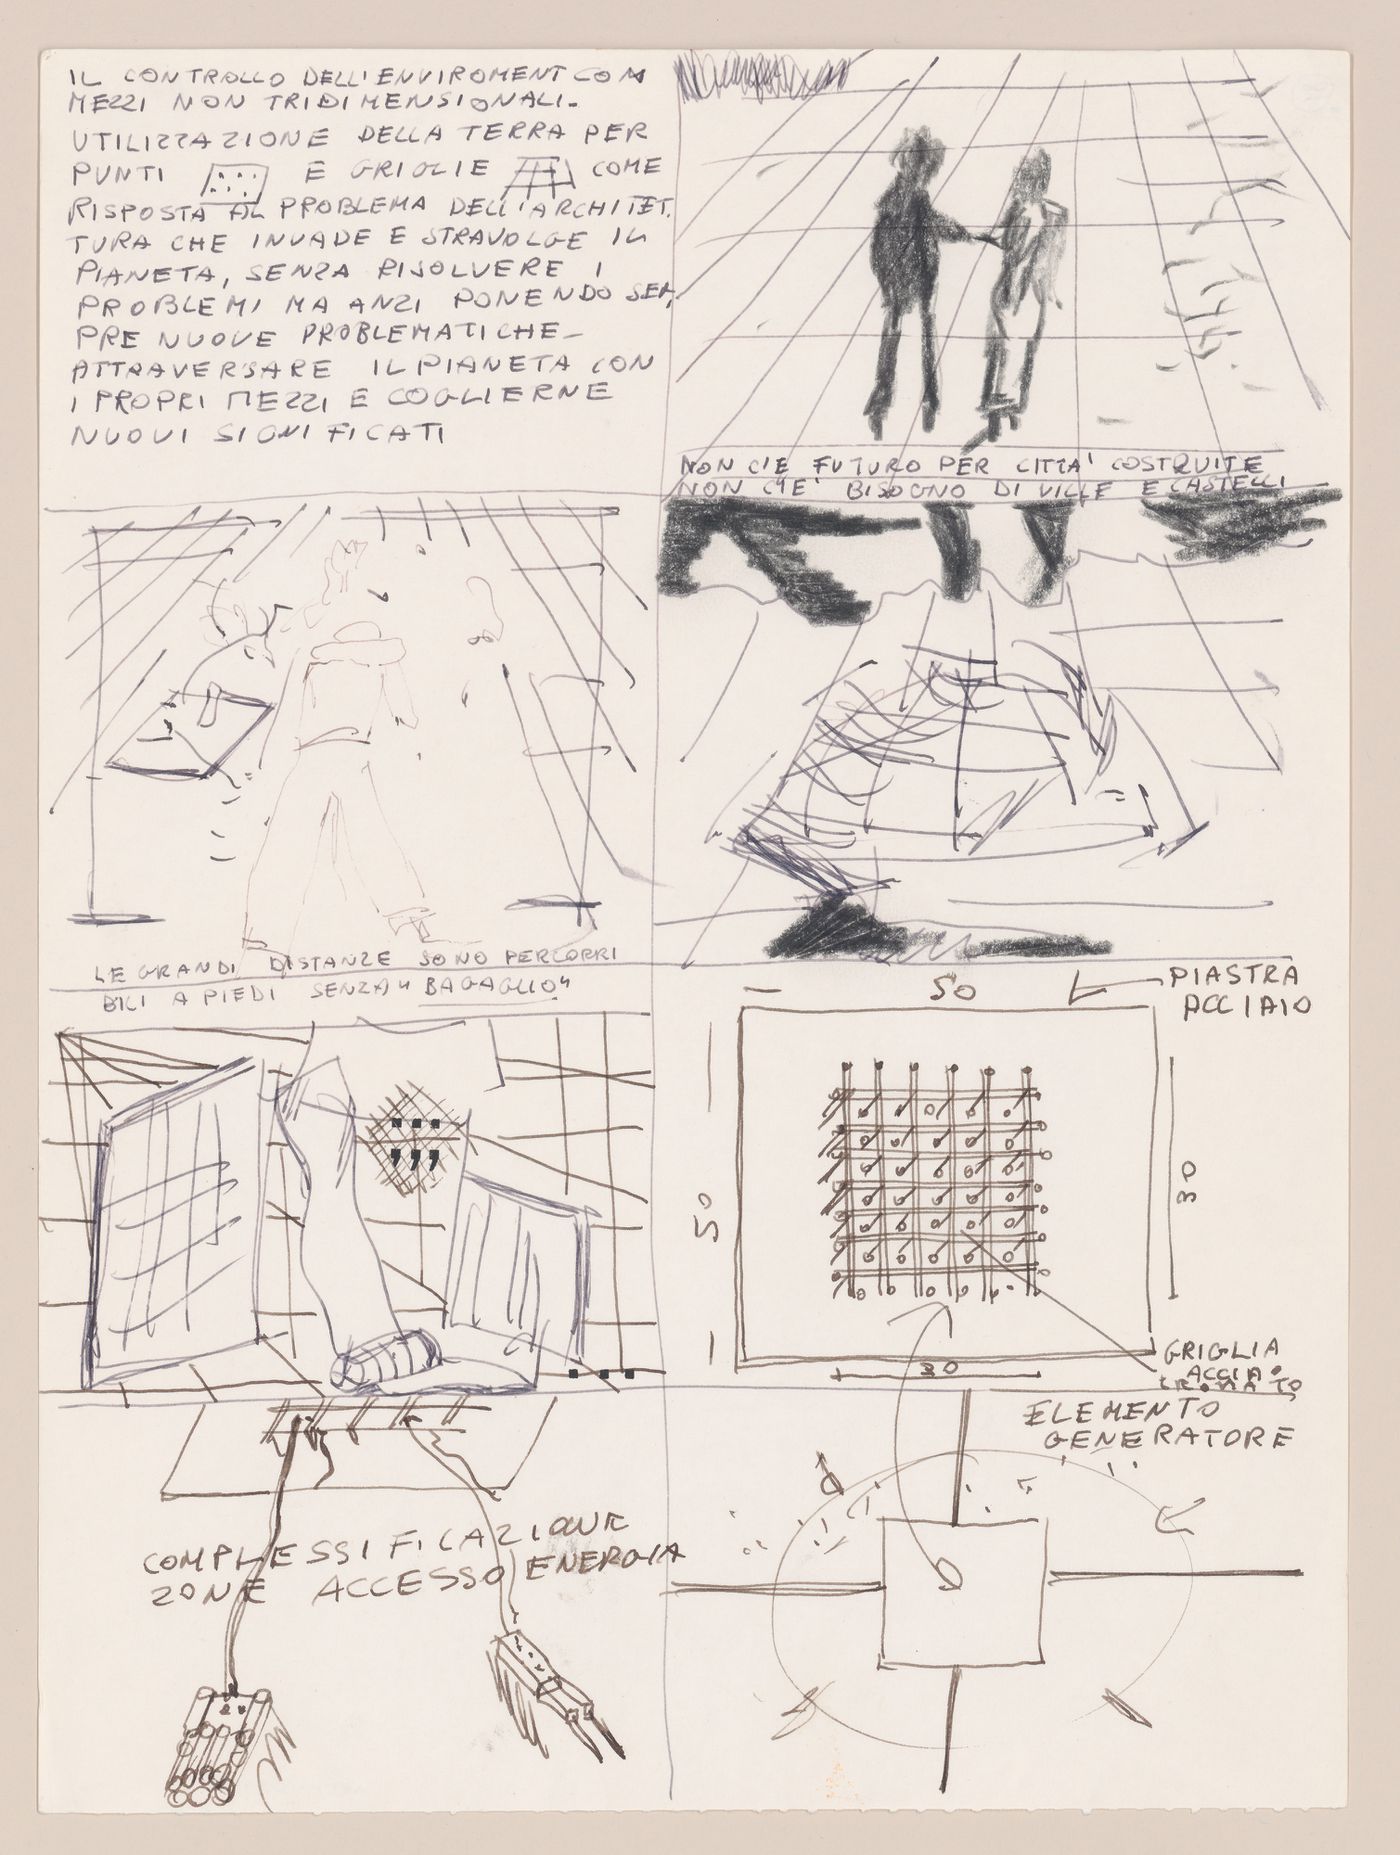 Page 12 of a storyboard describing filming locations and planning sketches of various scenes for Supersuperficie [Supersurface]